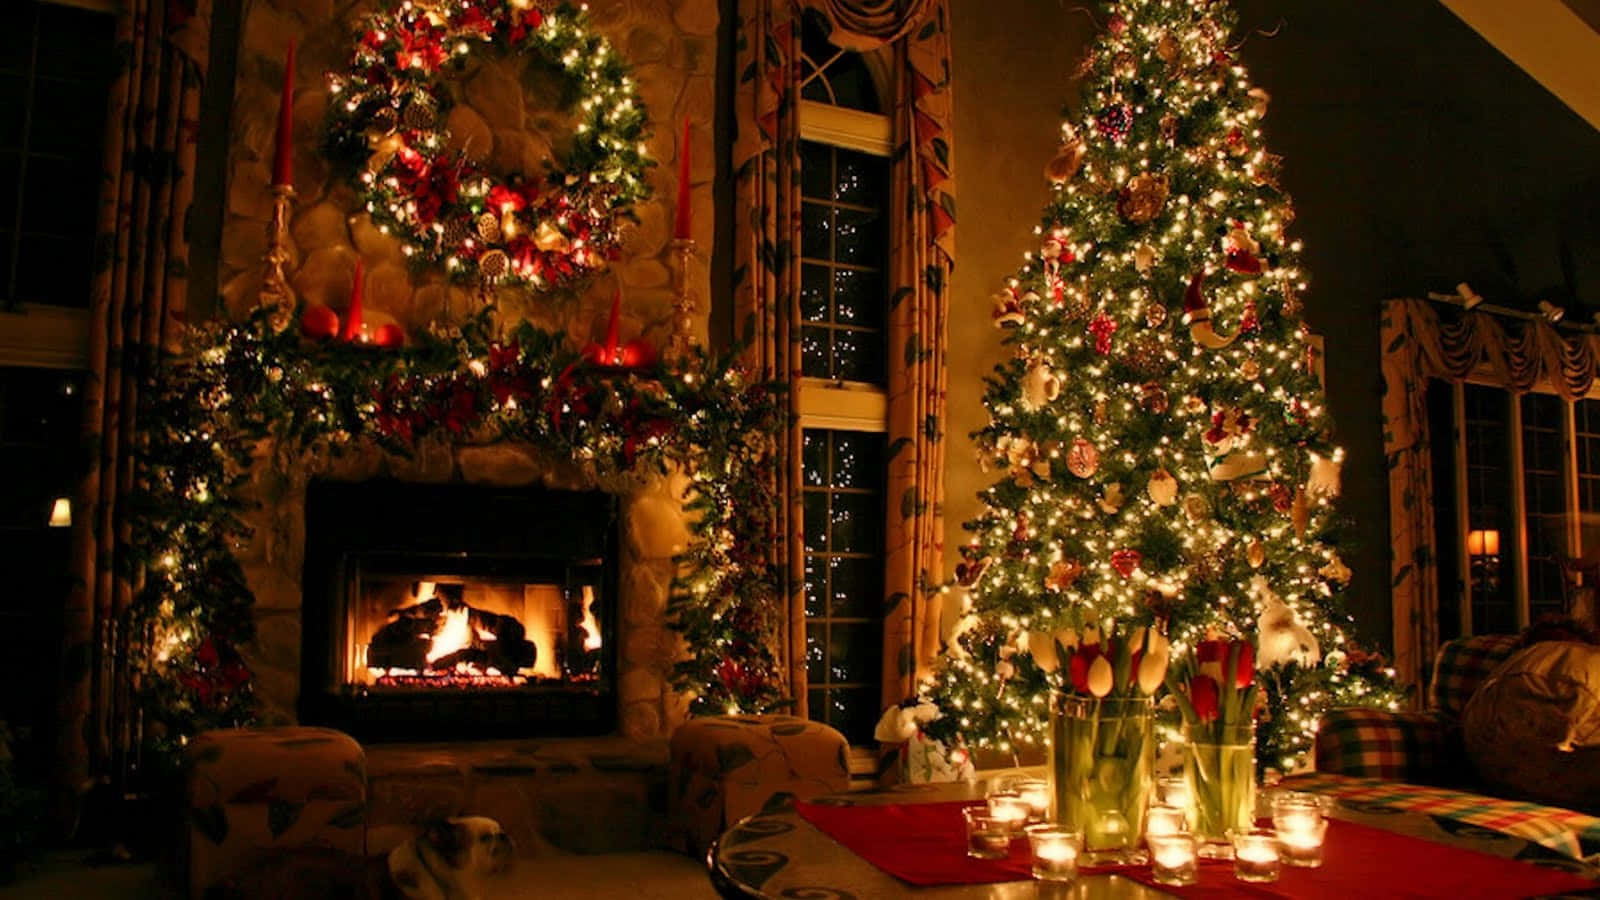 Christmas Tree In The Living Room With Fireplace Background